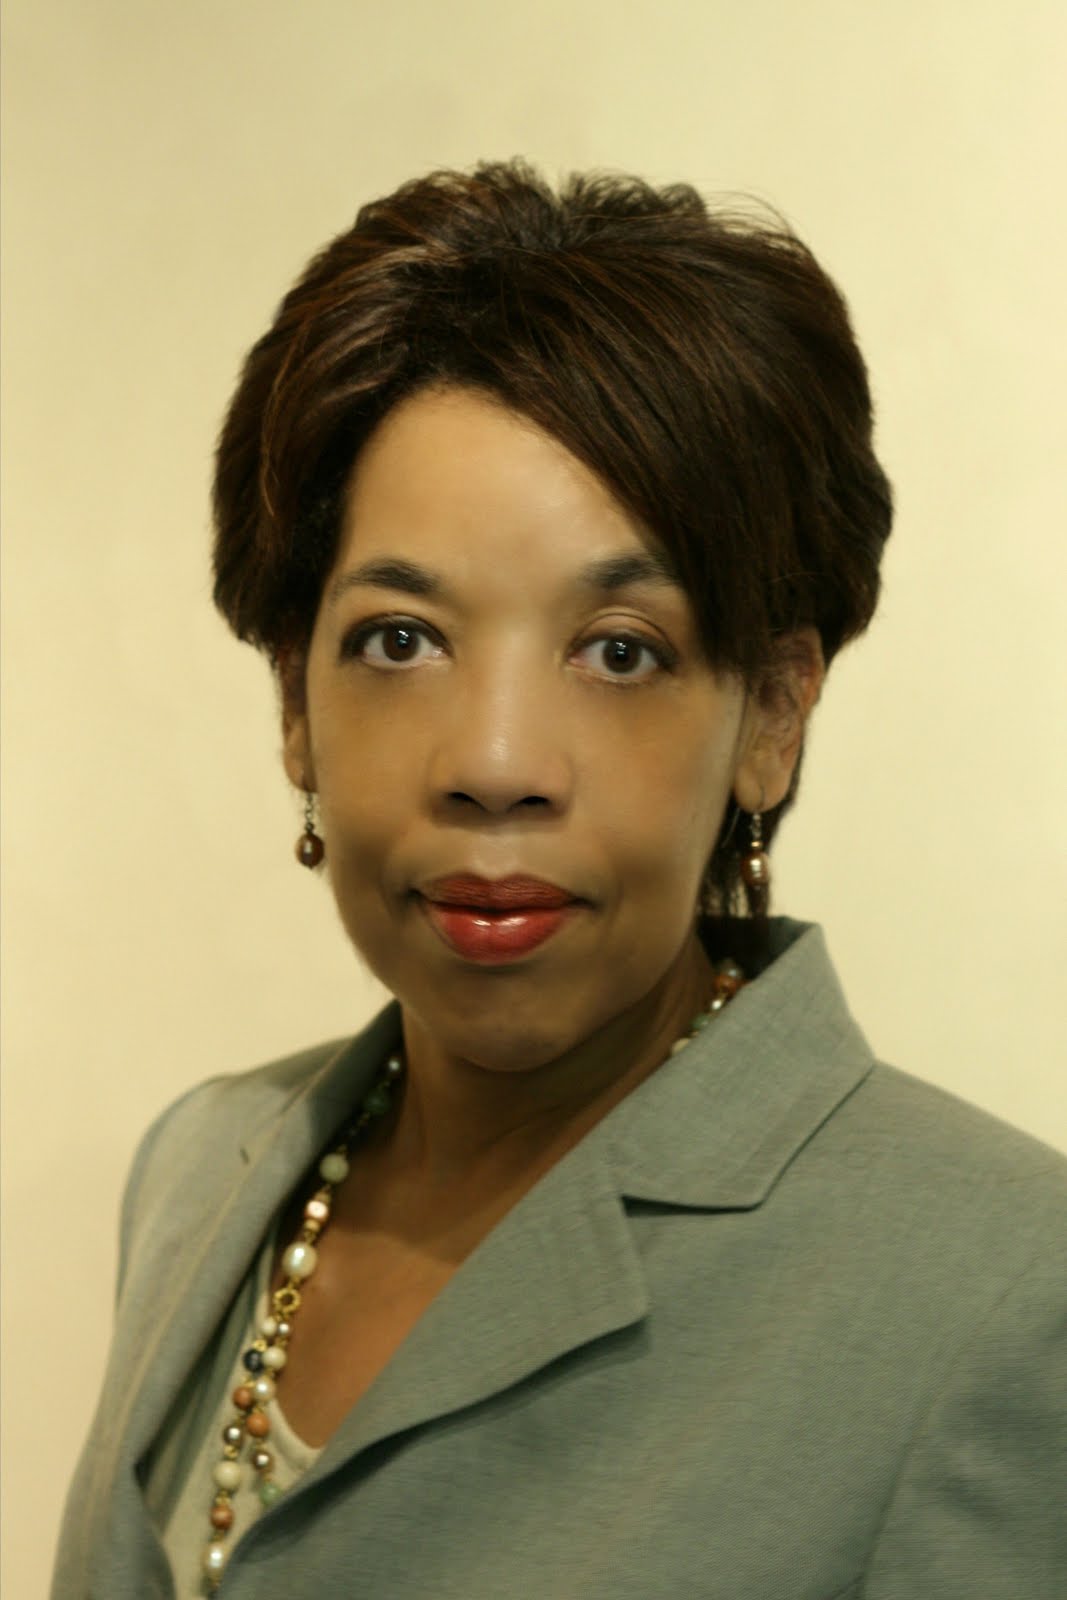 Currently, Kathy Walter-Mack serves as Associate Vice Chancellor, Human Resources, at Metropolitan Community College.